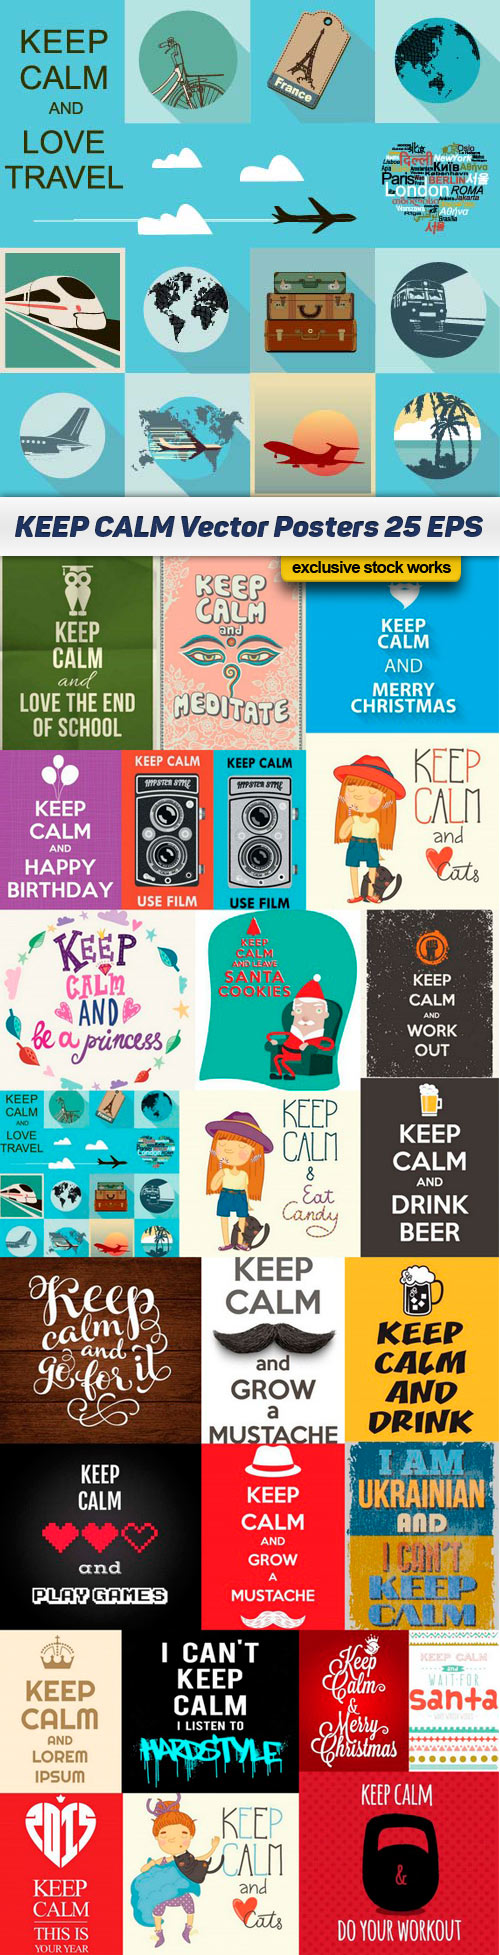 KEEP CALM Vector Posters 3